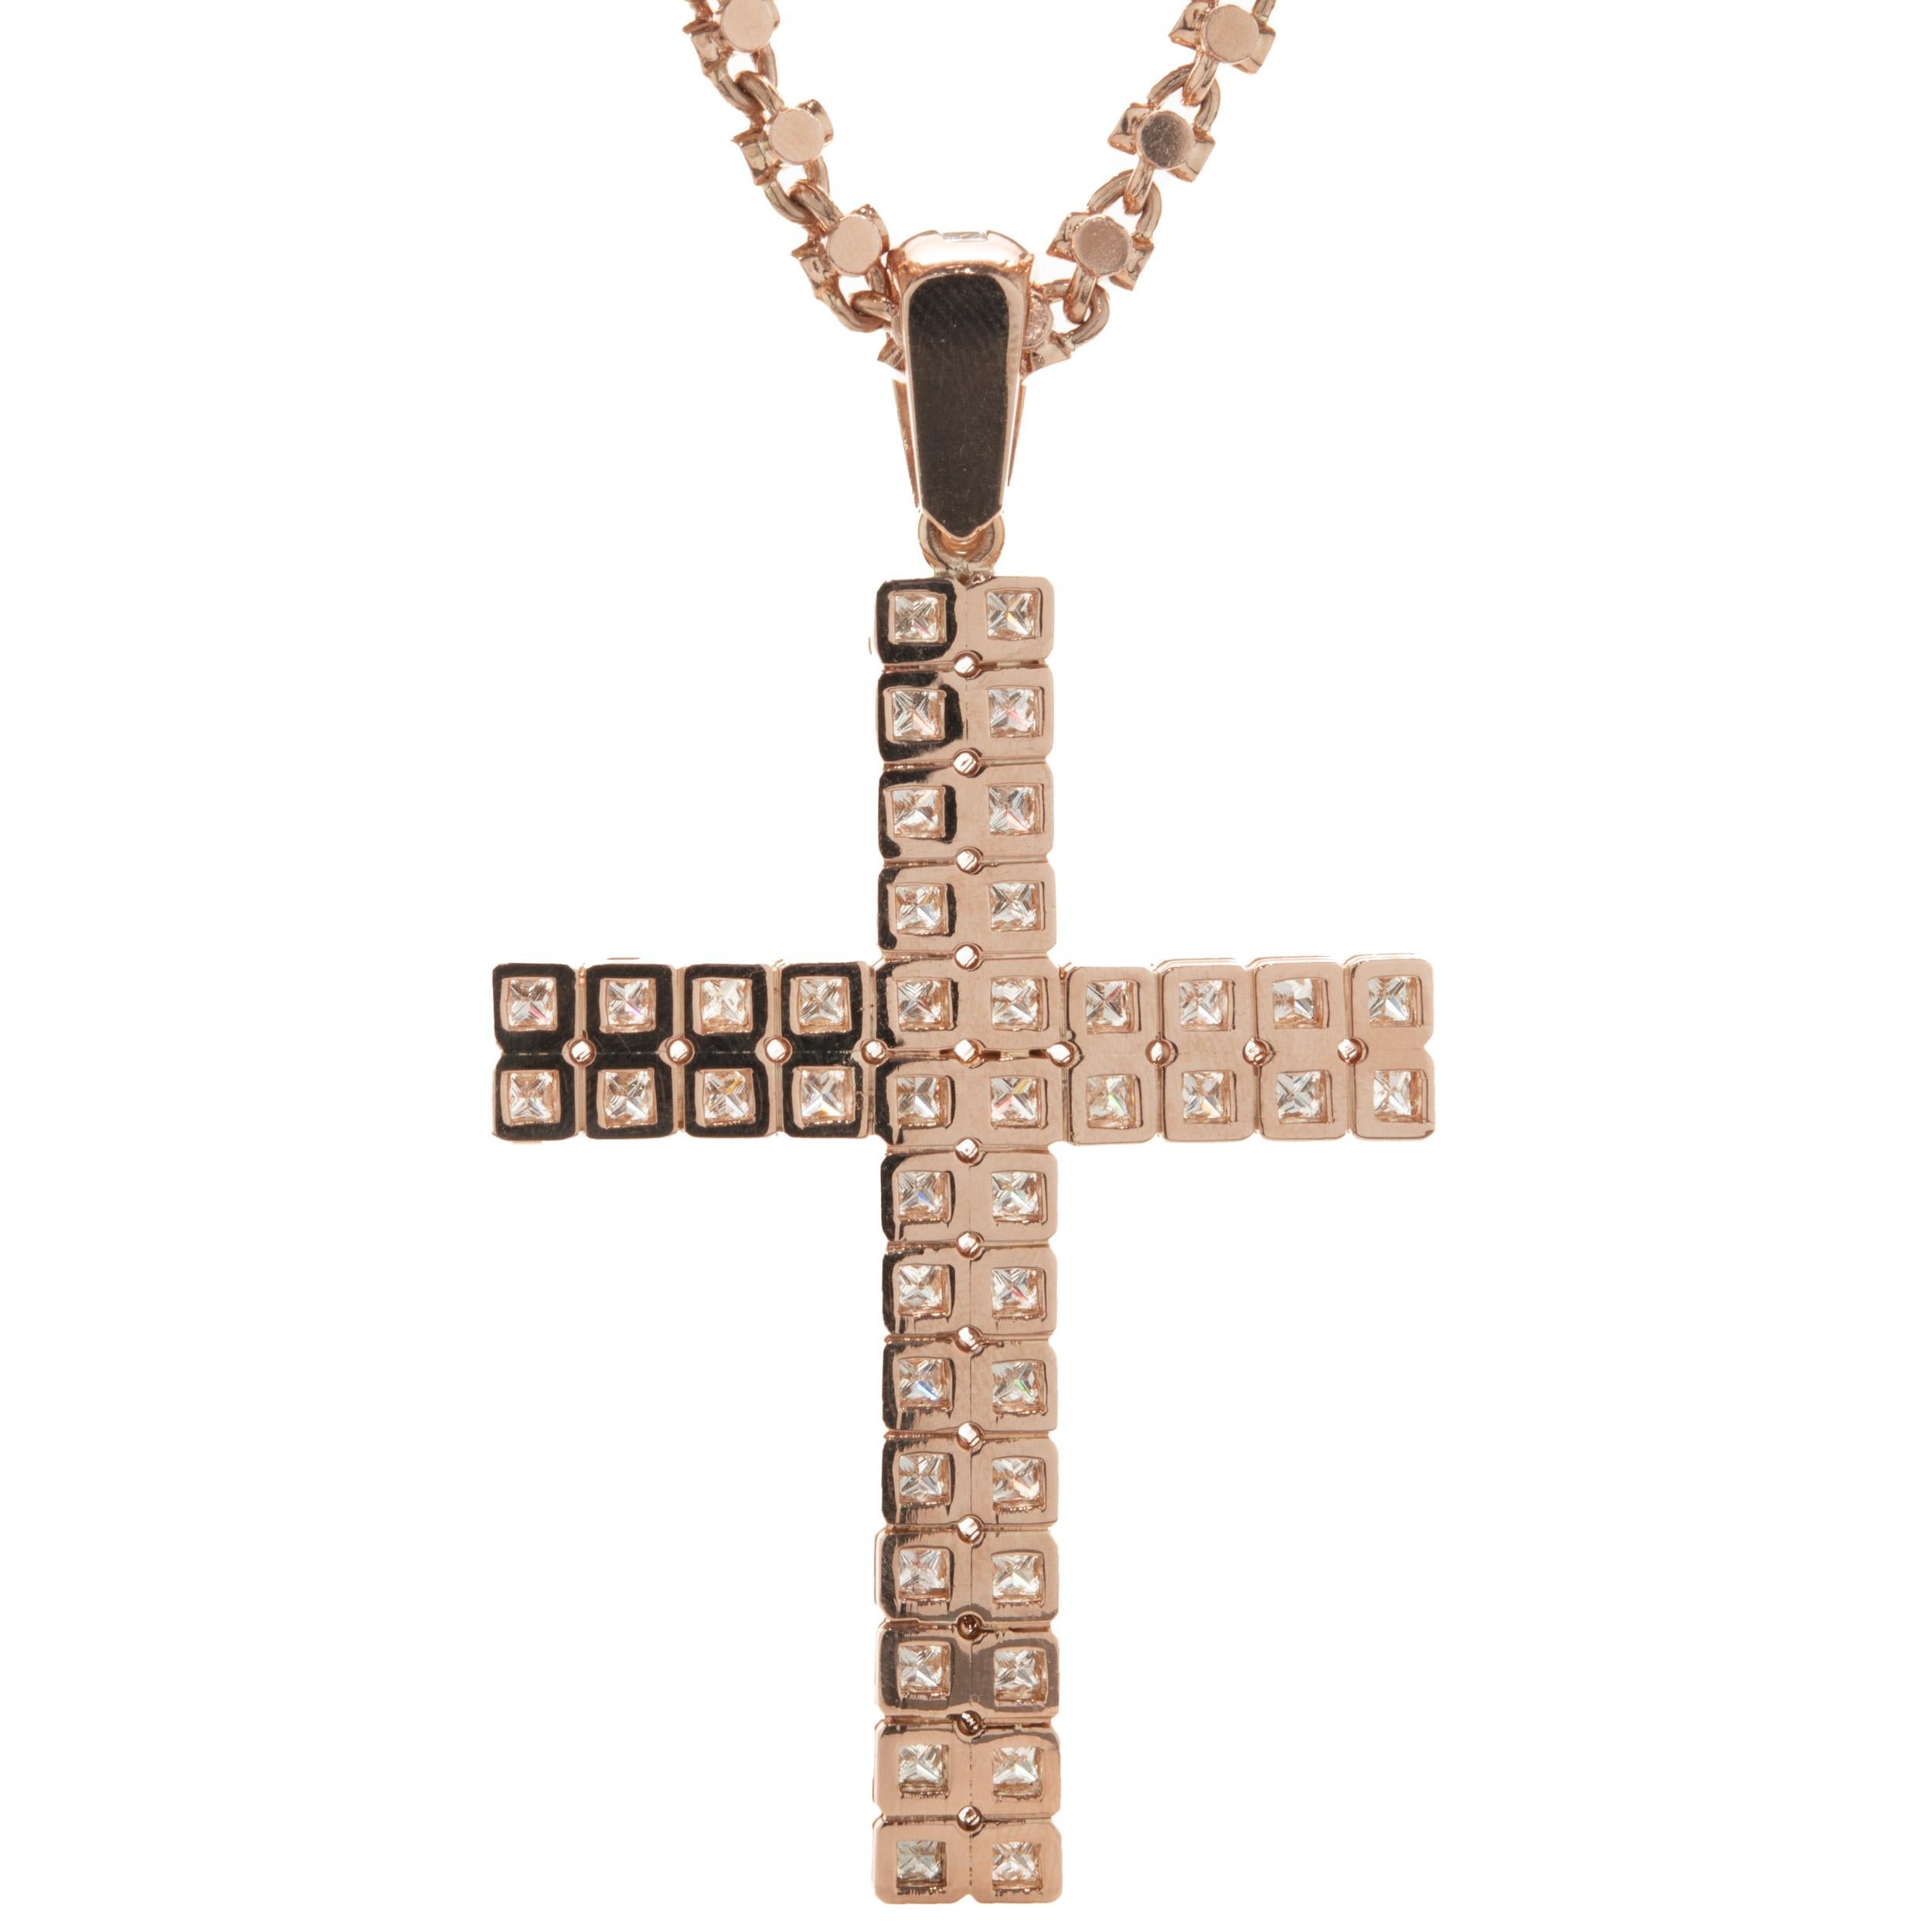 Designer: custom	
Material: 14K rose  gold
Diamonds: 52 princess cut = 8.04cttw
Color: G/H
Clarity: VS2-SI1
Dimensions: necklace measures 30-inches in length 
Weight: 166.15 grams